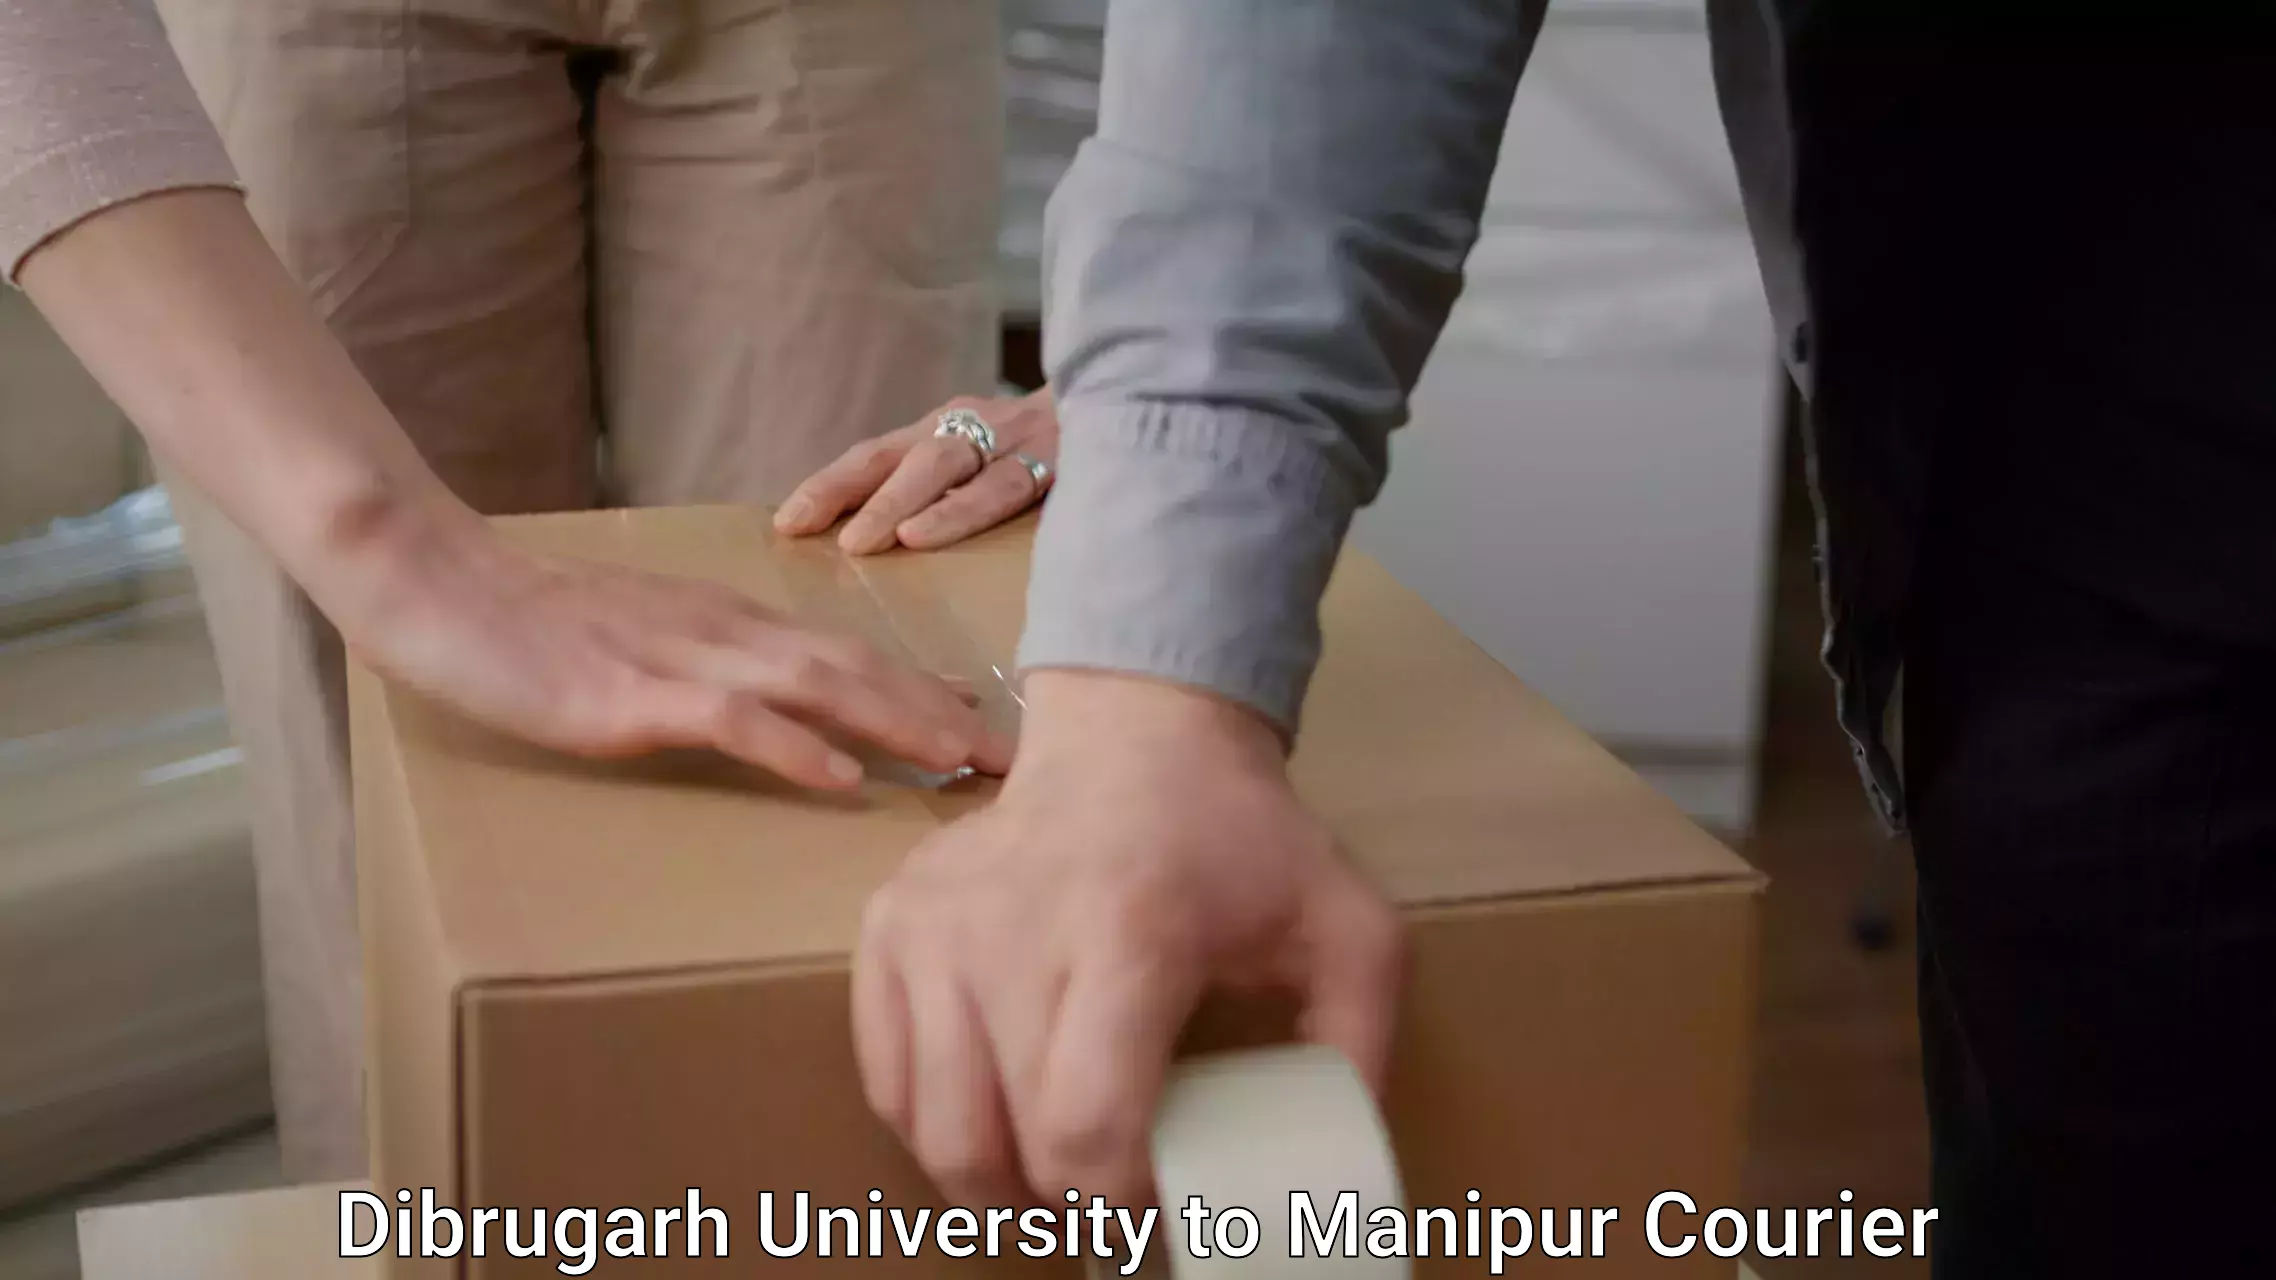 Affordable home movers Dibrugarh University to Chandel